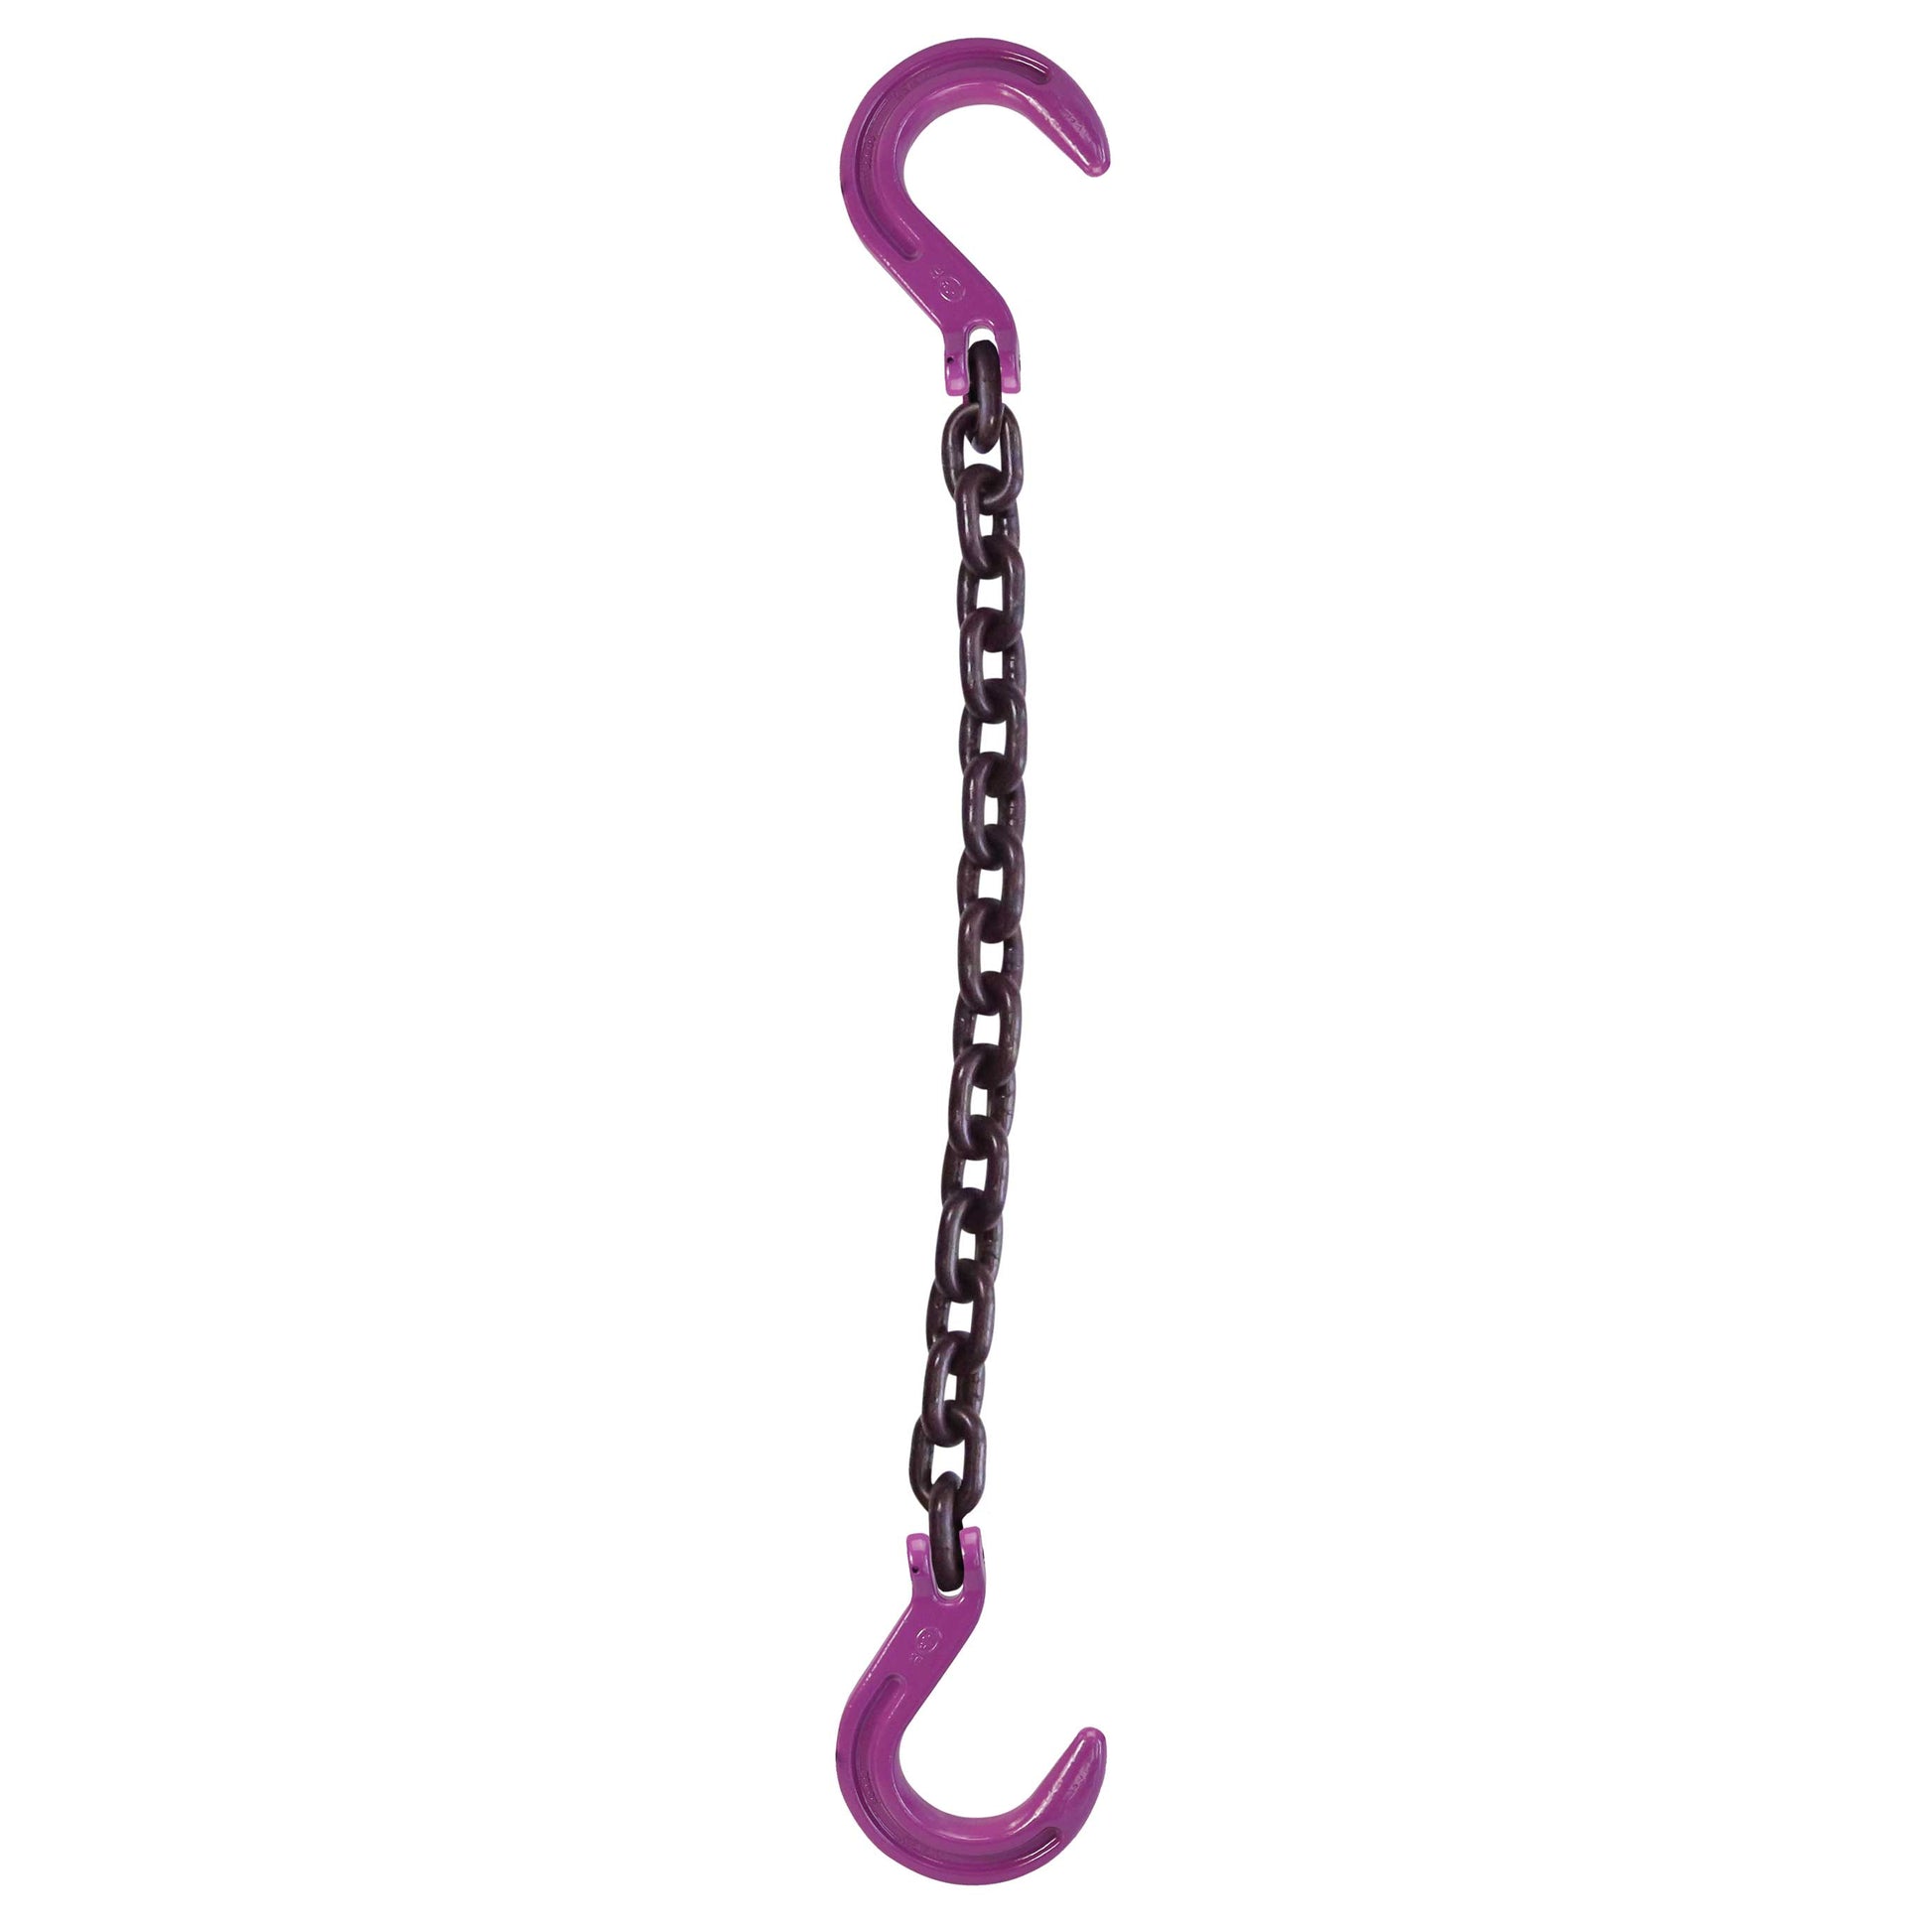 516 inch x 16 foot Single Leg Chain Sling w Foundry & Foundry Hooks Grade 100 image 1 of 2